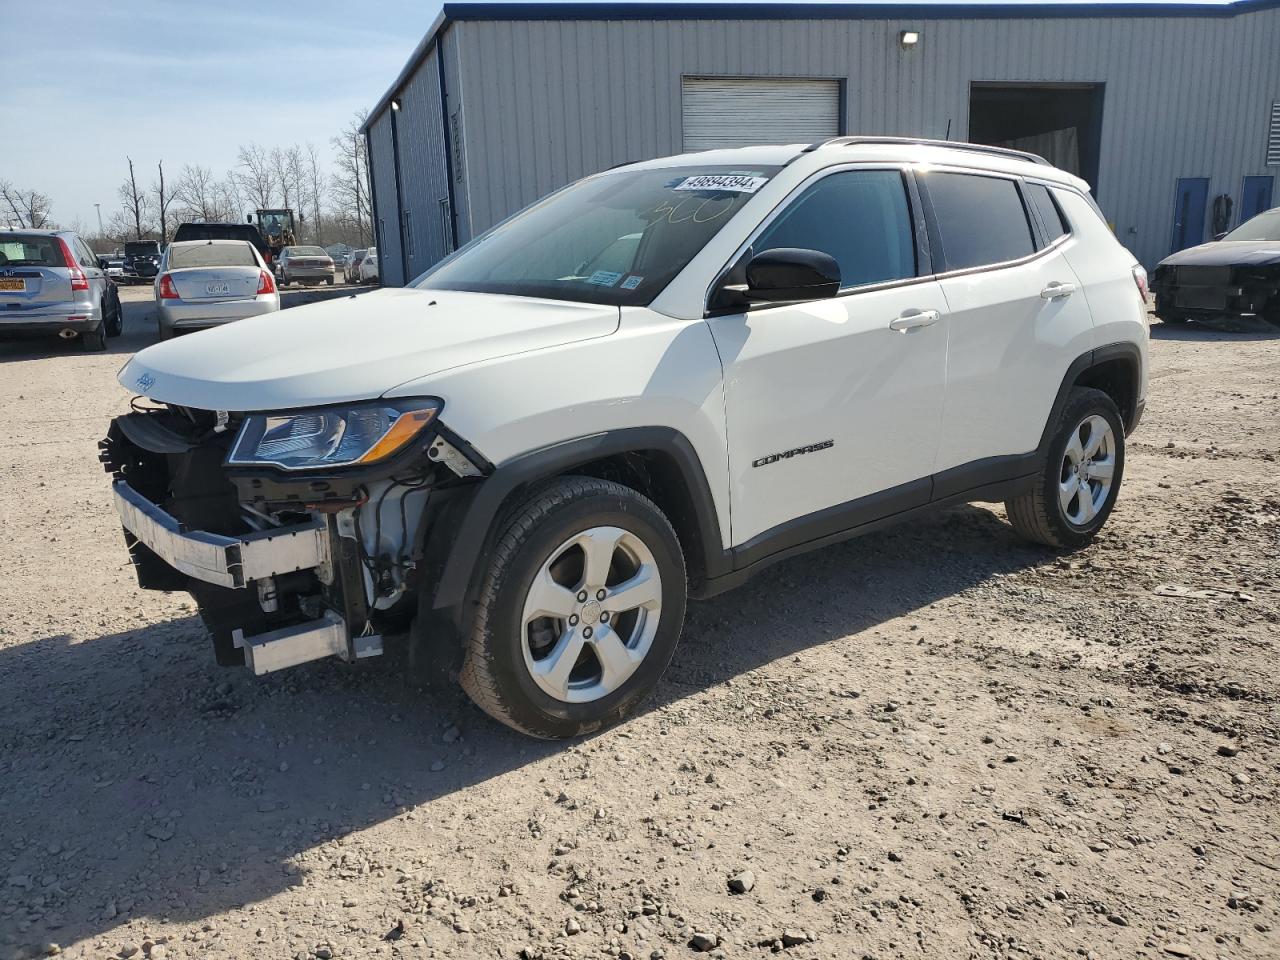 vin: 3C4NJDBB0KT845400 3C4NJDBB0KT845400 2019 jeep compass 2400 for Sale in 13036 2415, Ny - Syracuse, Central Square, New York, USA